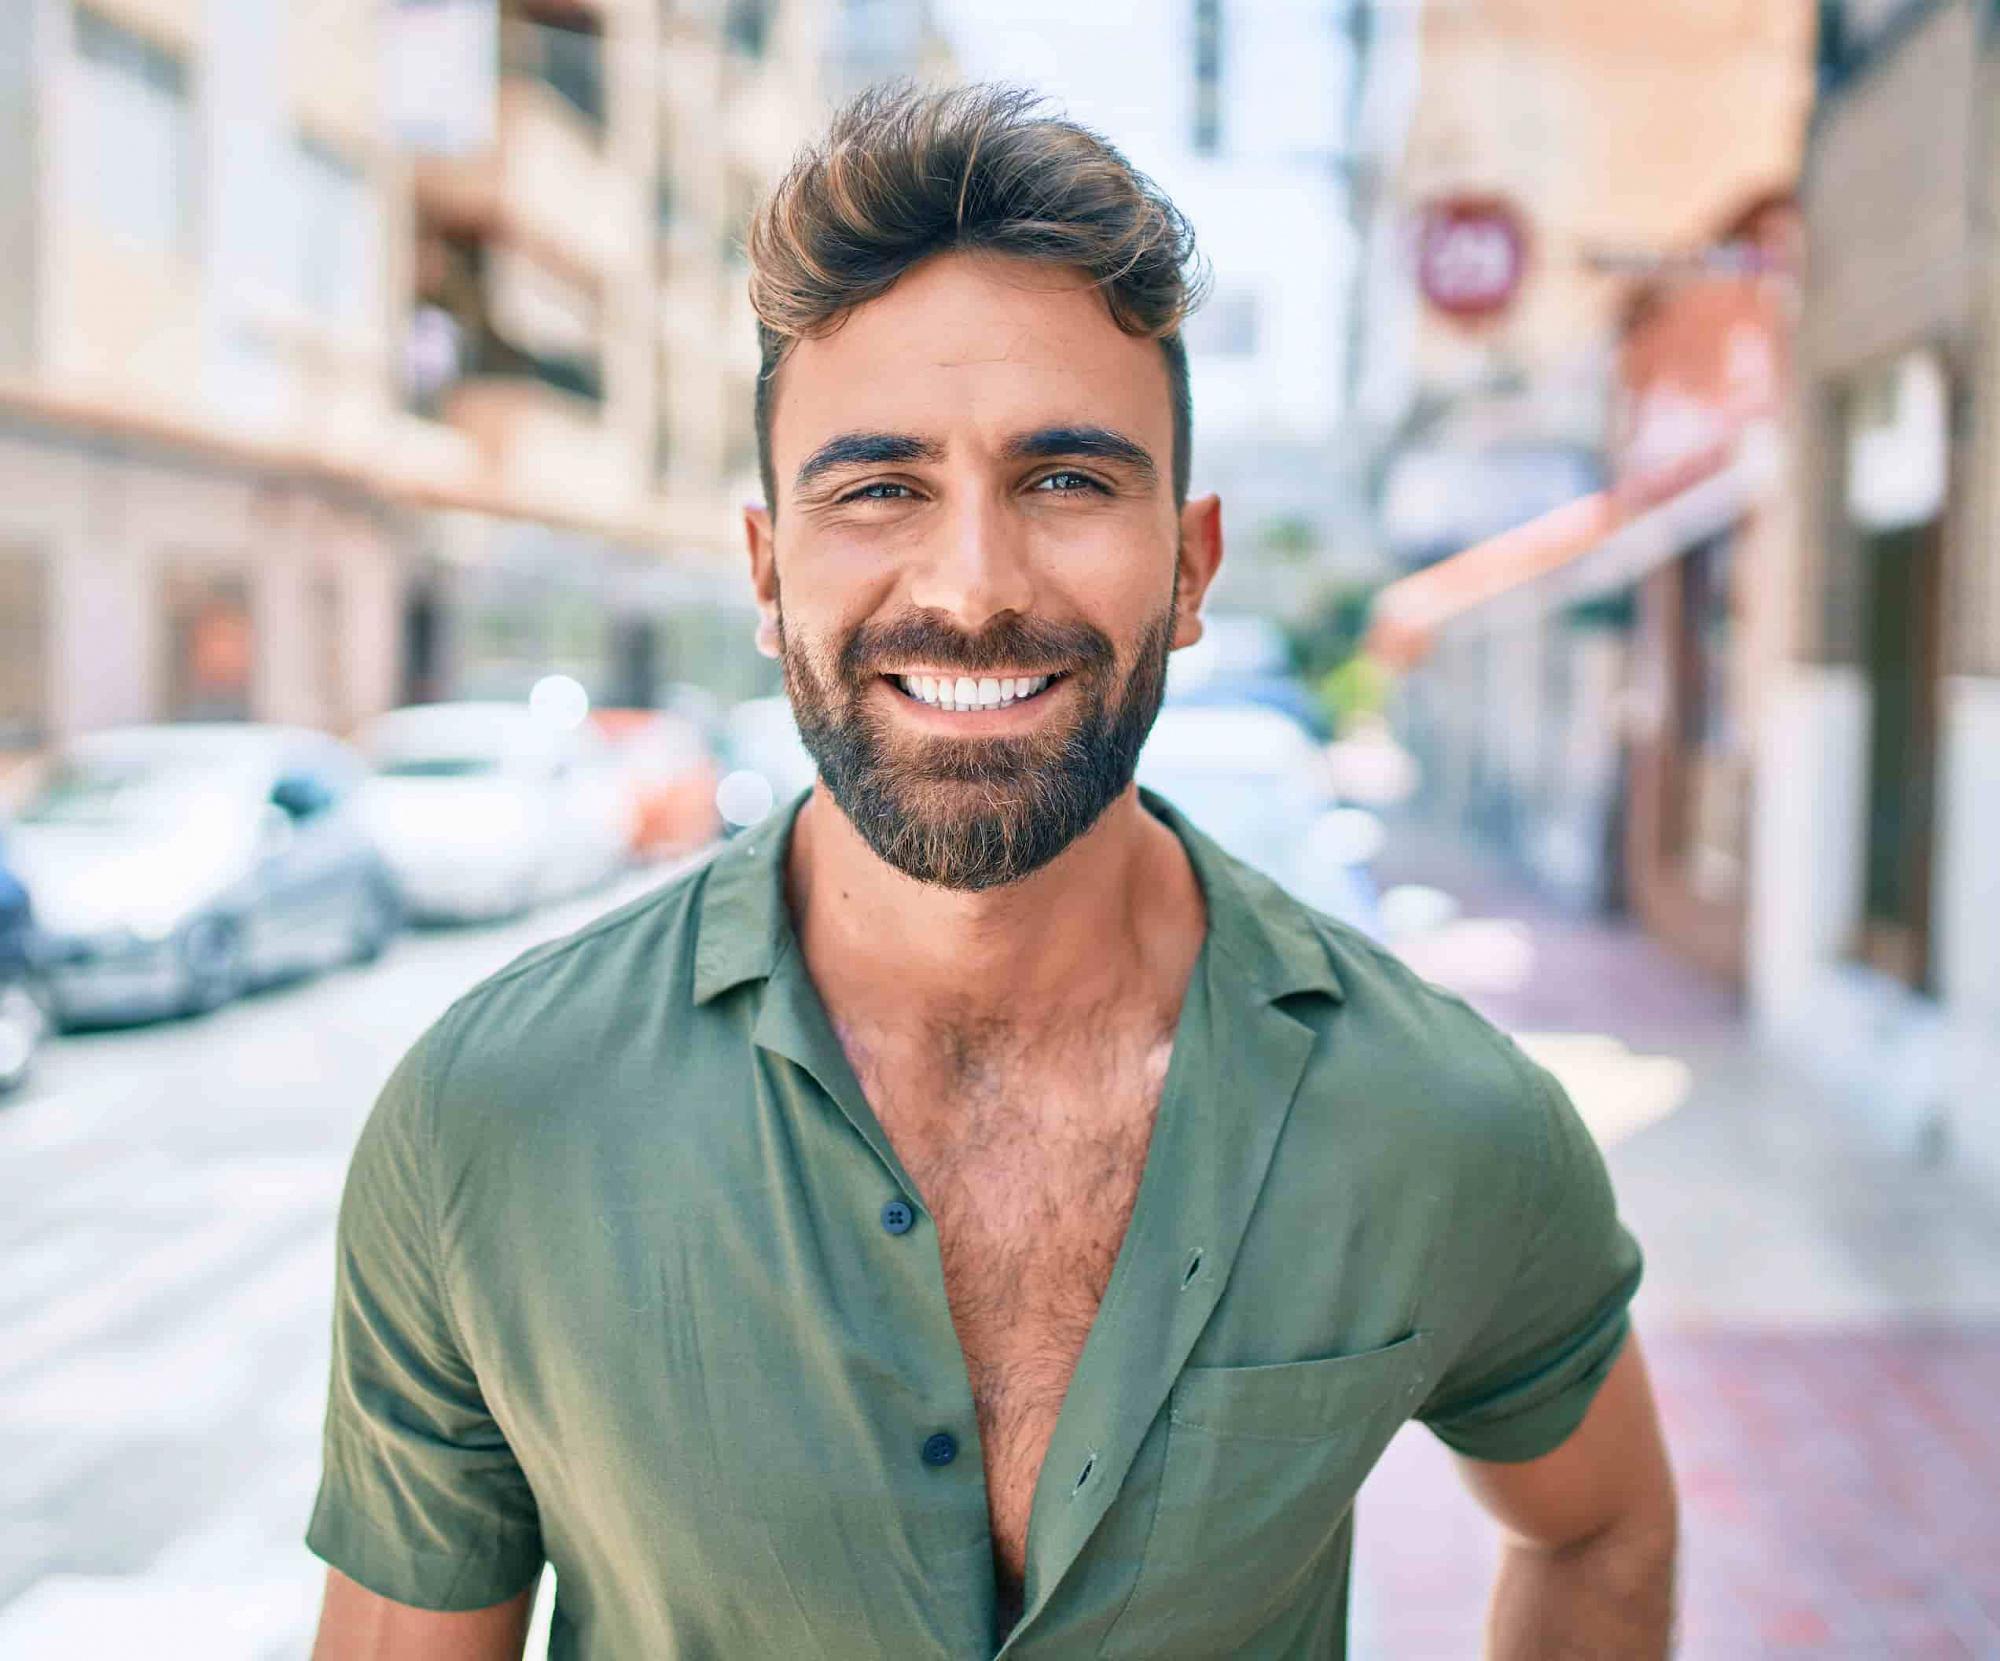 man smiling in city after Gynecomastia